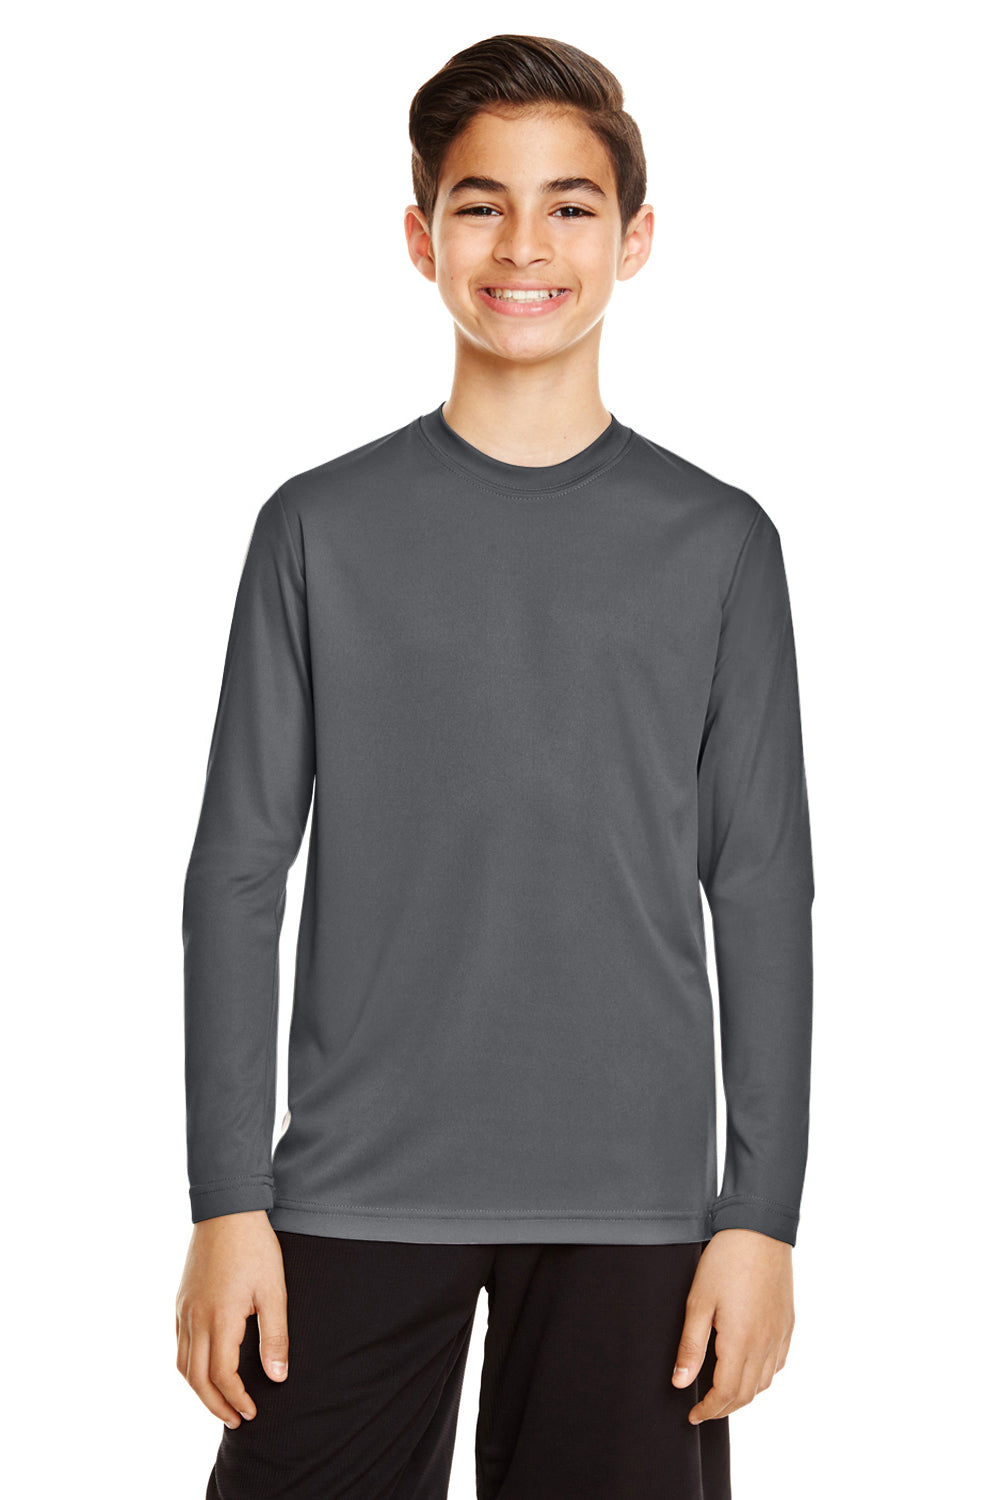 Team 365 TT11YL Youth Zone Performance Moisture Wicking Long Sleeve Crewneck T-Shirt Graphite Grey Front